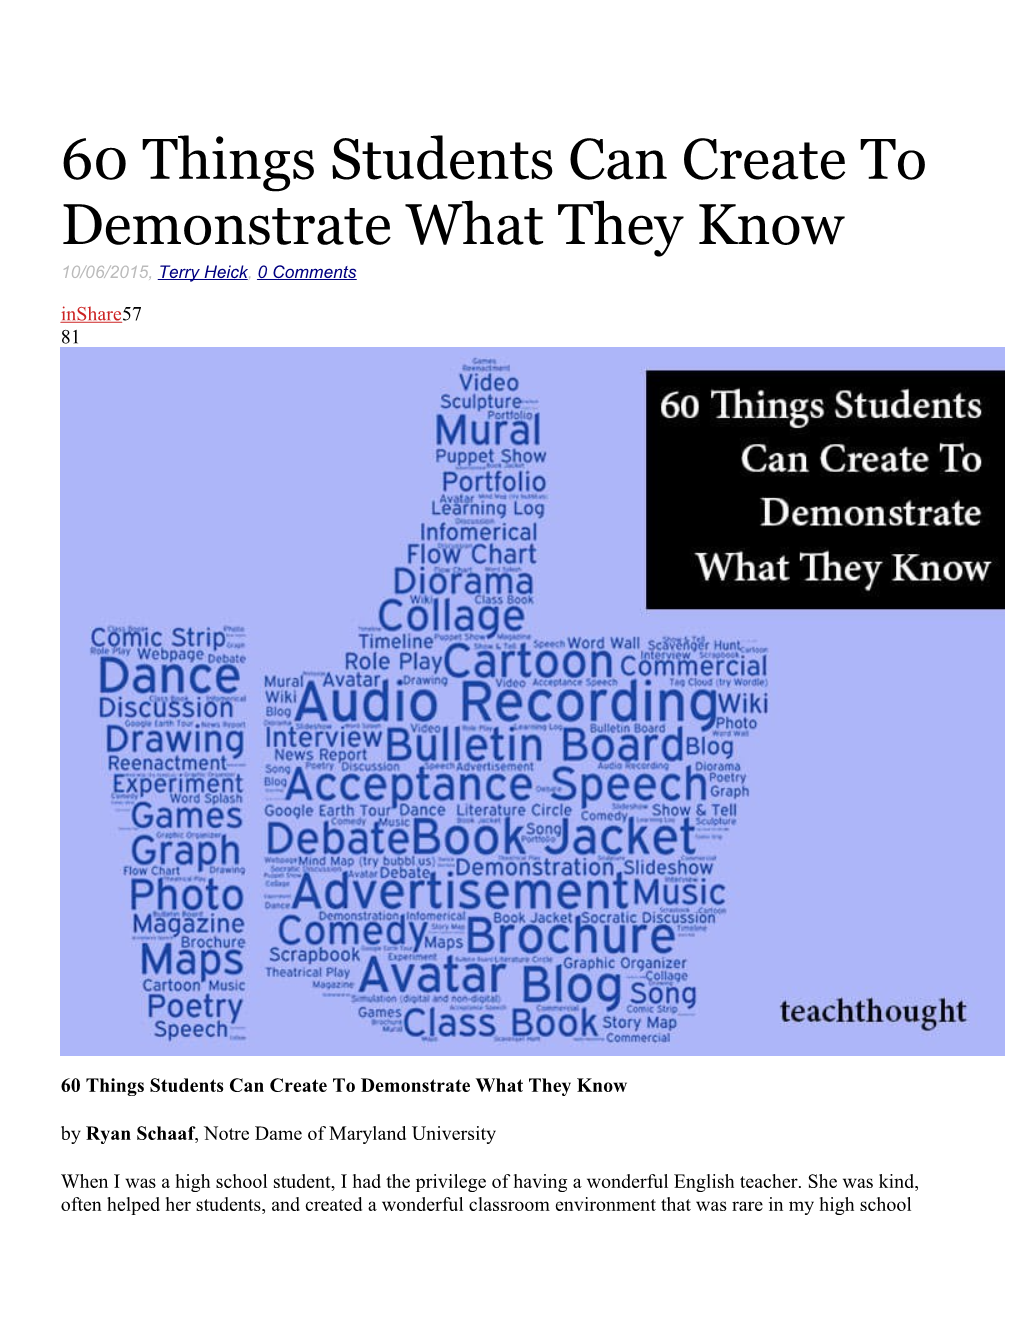 60 Things Students Can Create to Demonstrate What They Know